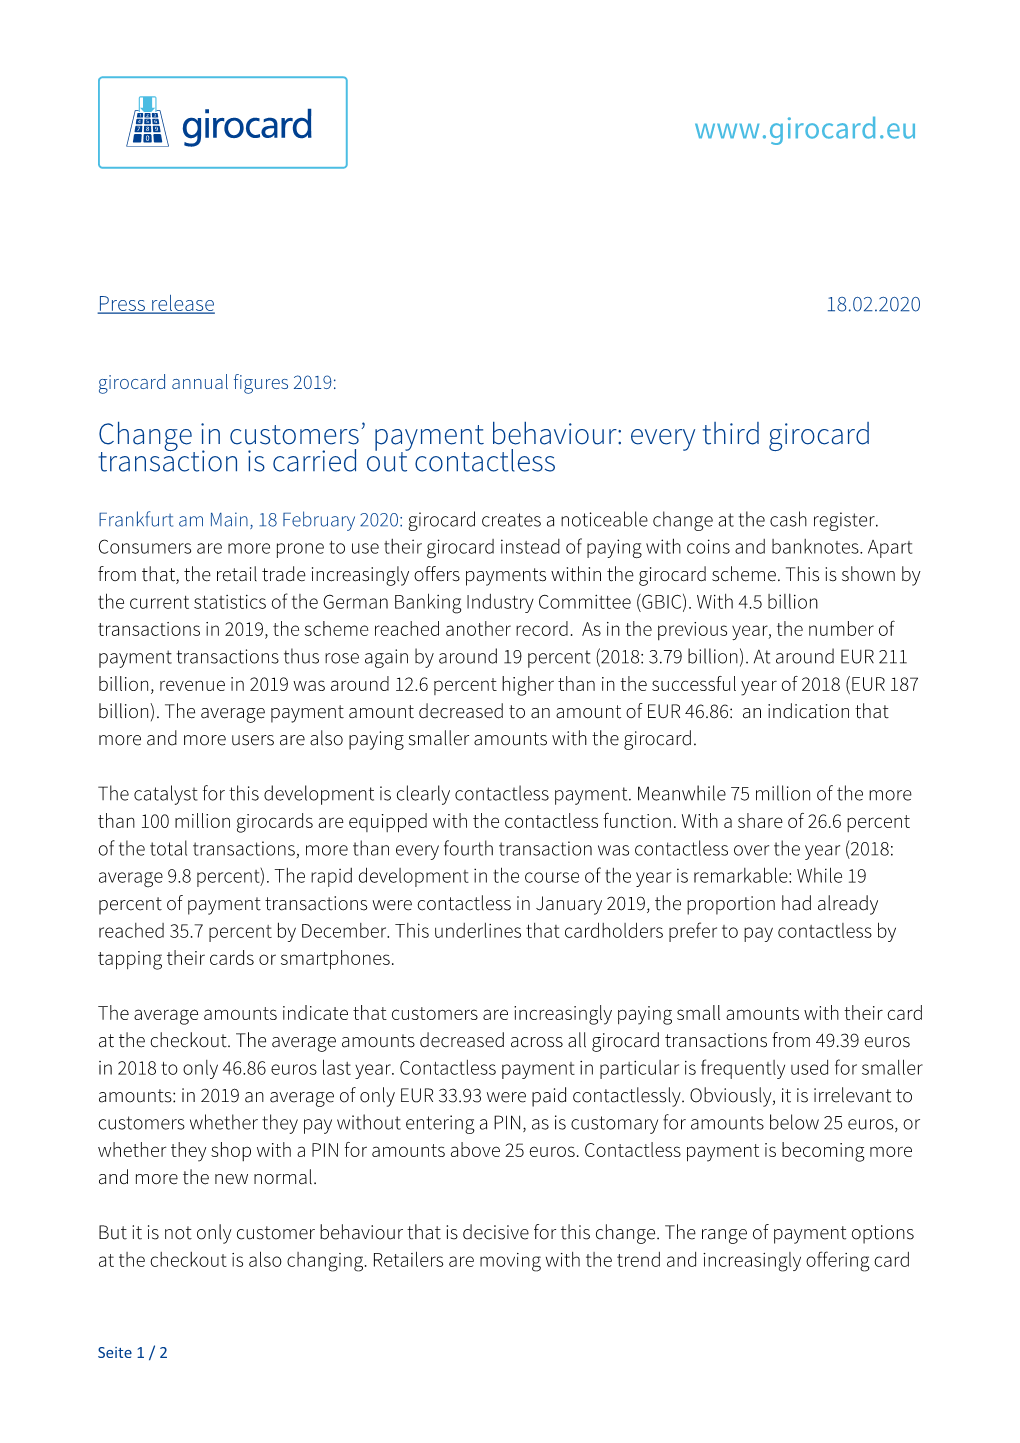 Girocard Press Release Annual Figures 2019